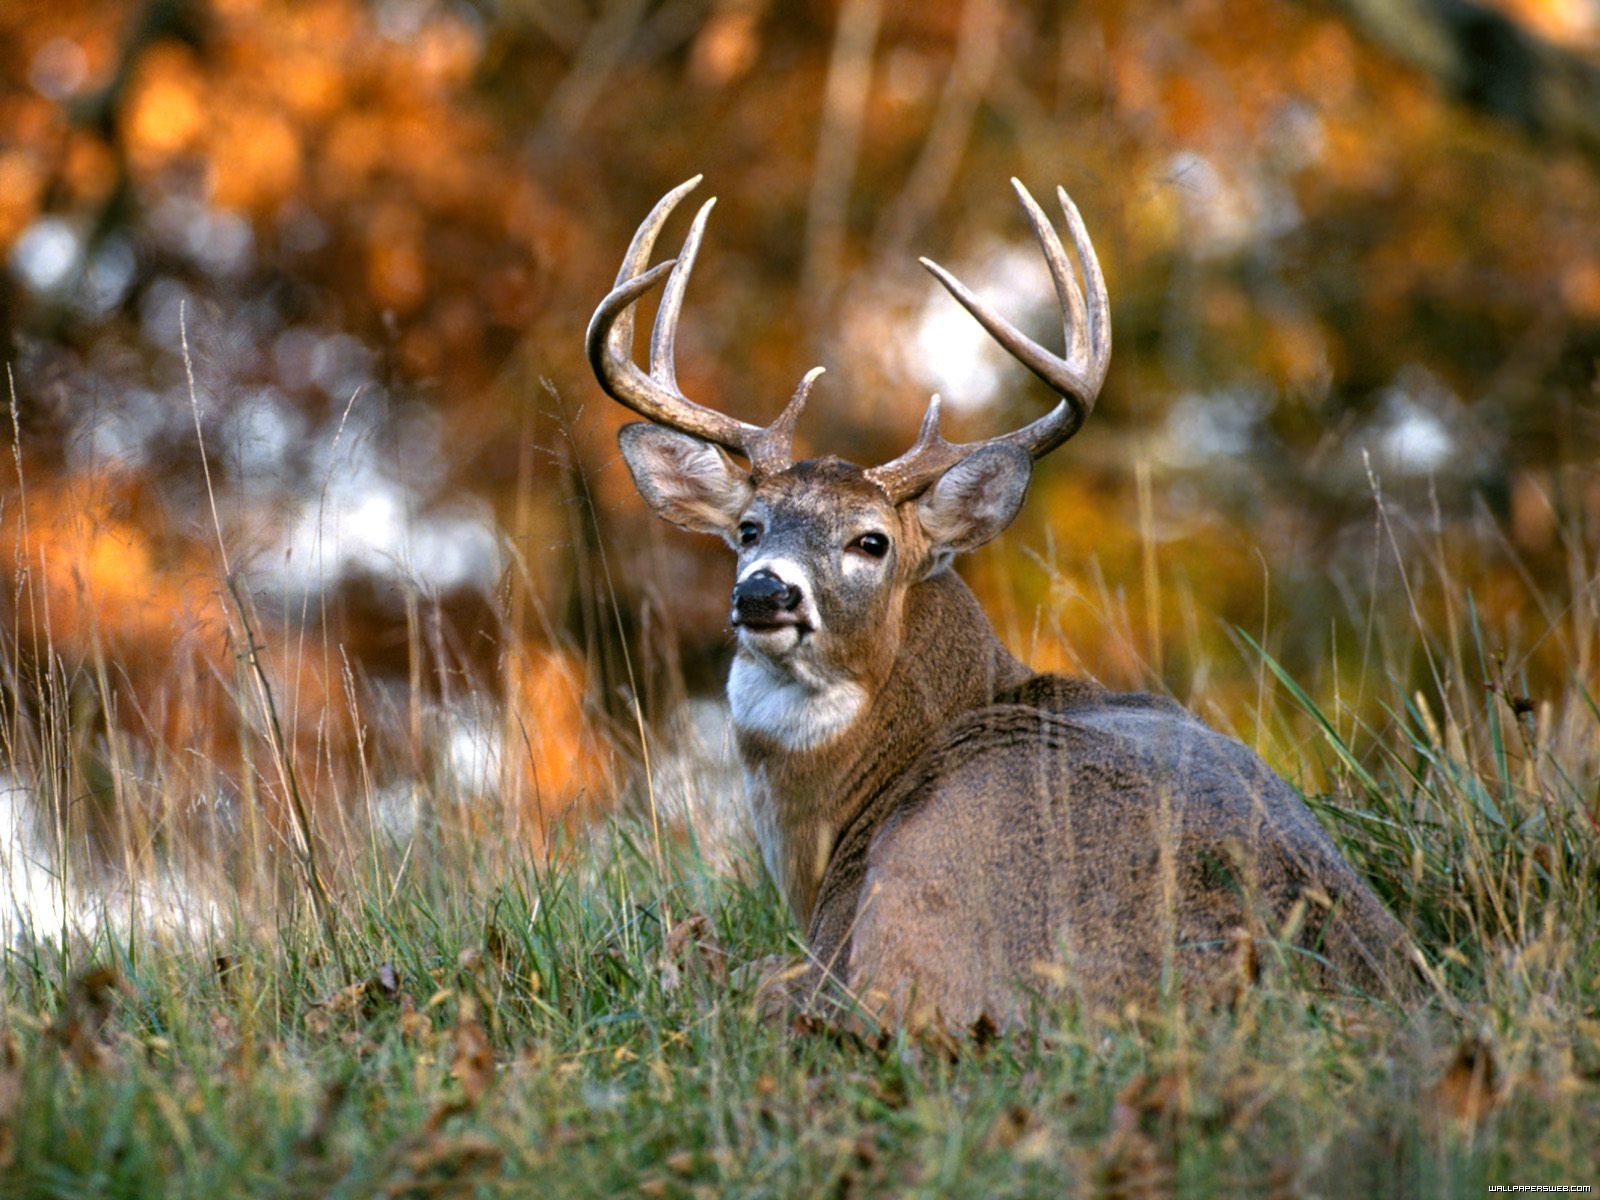 Artist Photographer Striker Tags Deer Pics The White Tailed